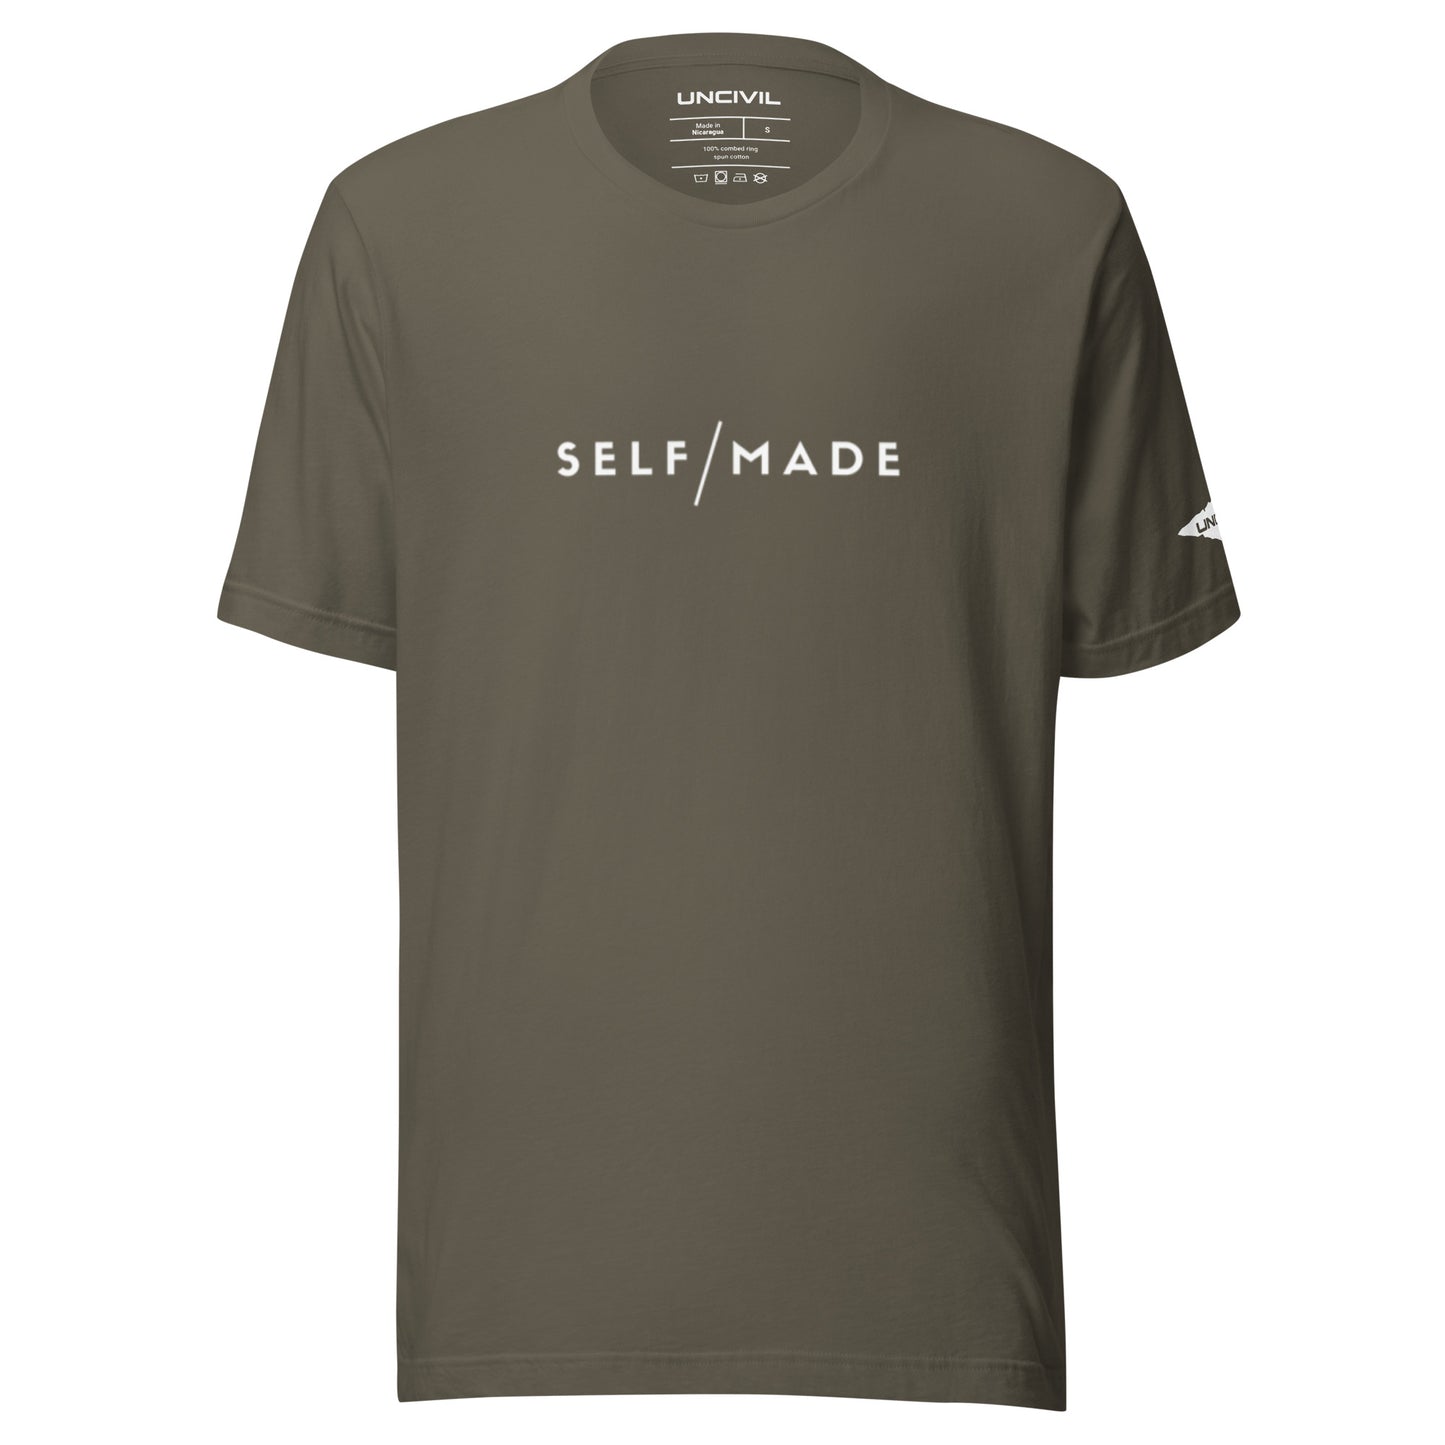 Our Self/Made UNCIVIL lifestyle shirt embodies empowerment and resilience. Army green unisex shirt.